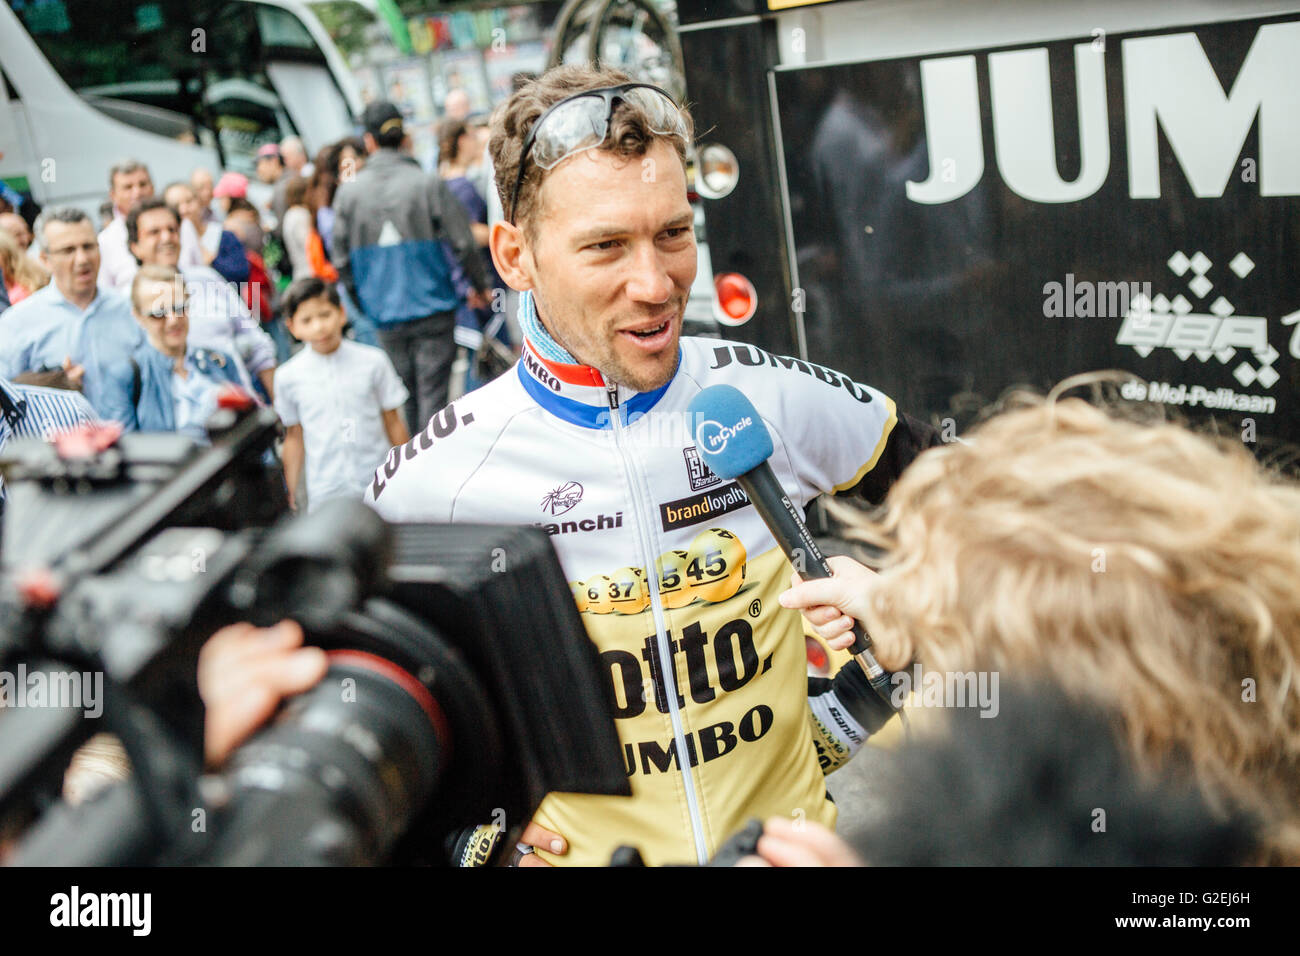 Torino, Italy, May 29th 2016. Maarten Tjallingii from Lotto Jumbo is being interviewed after the final stage (Torino) of the Giro d’Italia 2016. Credit:  Gonzales Photo - Alberto Grasso. Stock Photo